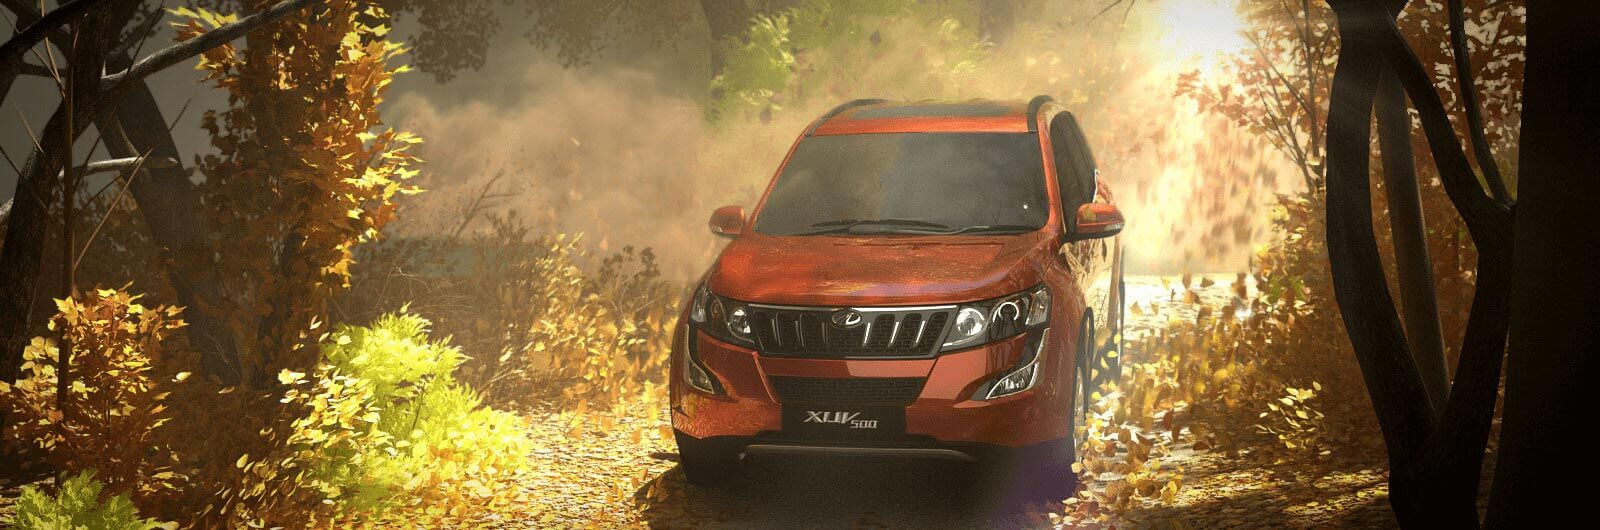 All Wheel Drive Luxury Suv With Abs, Esp, Gps & Air - Mahindra Xuv500 2017 Wallpaper White , HD Wallpaper & Backgrounds